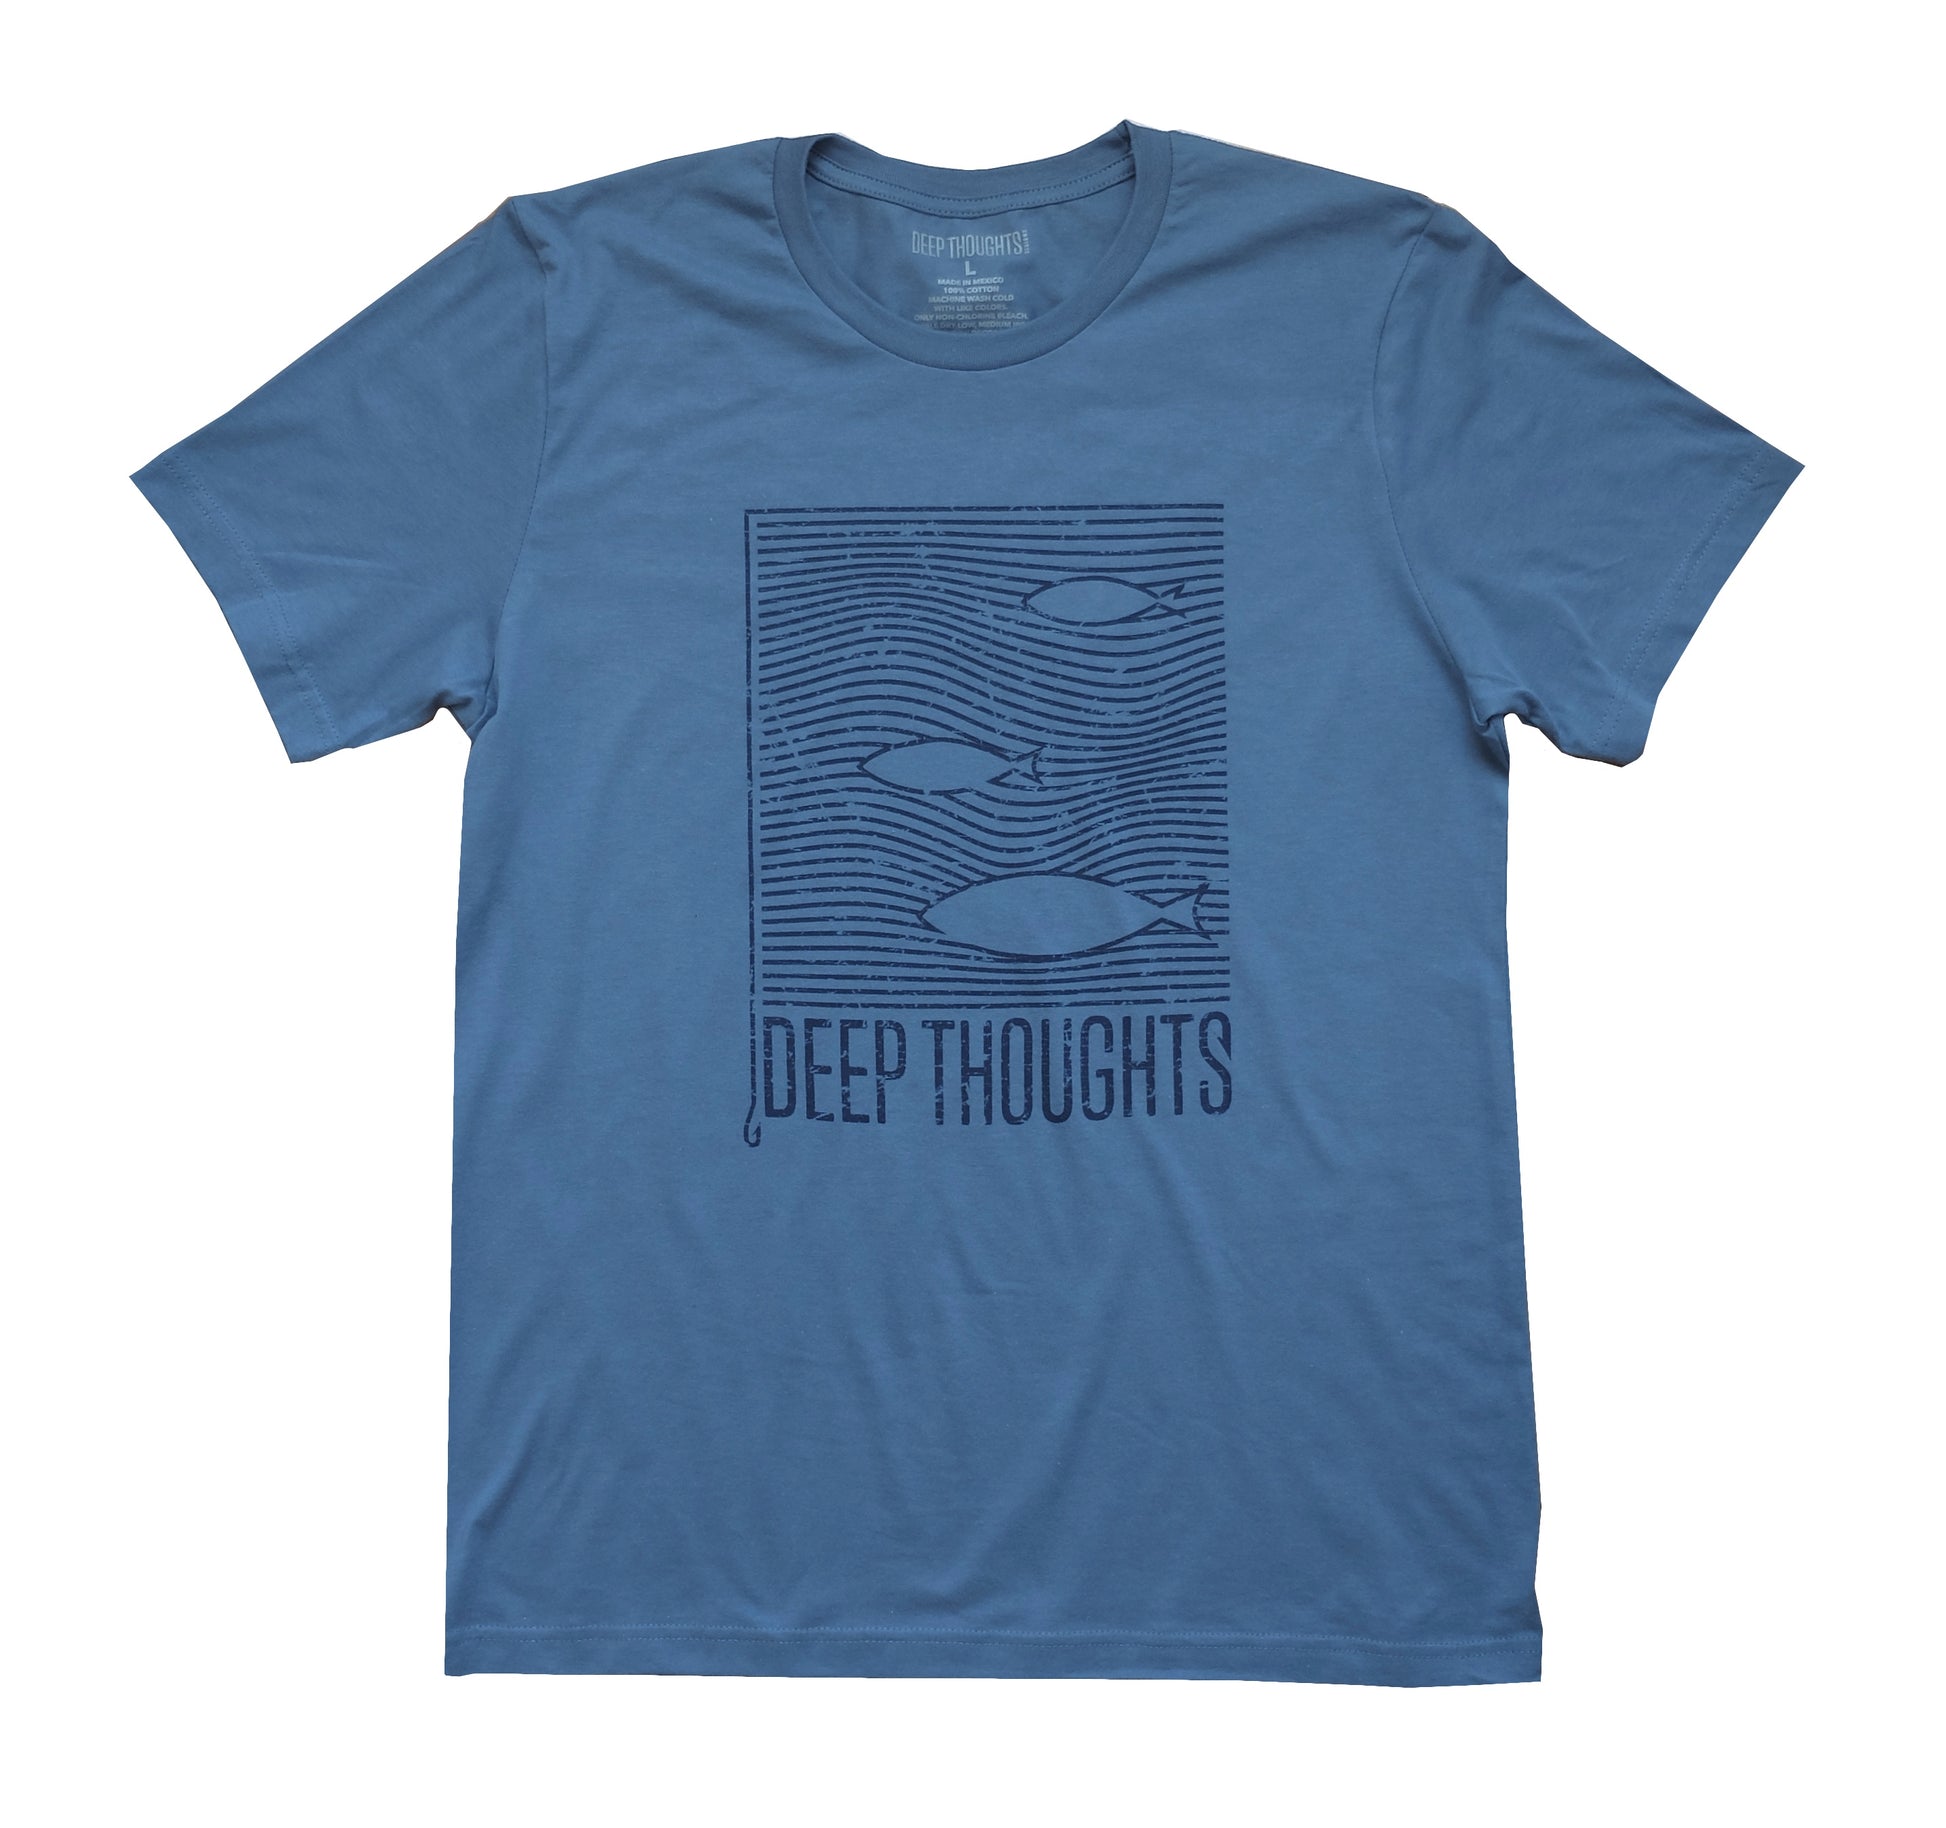 steel blue cotton t-shirt with navy blue print showing fish swimming among lined ocean currents